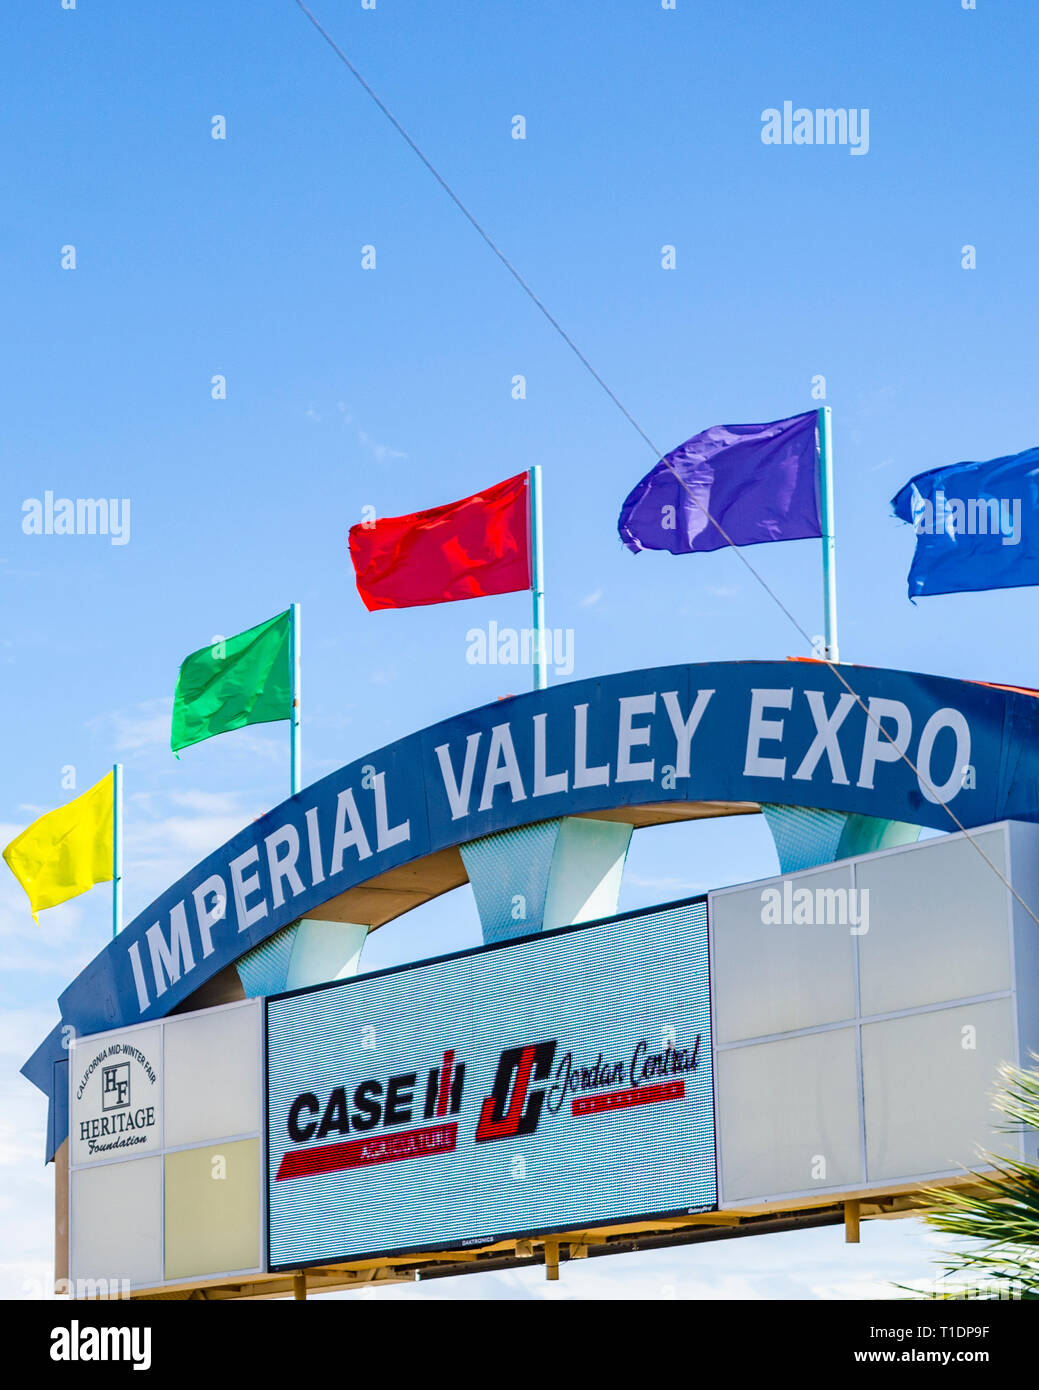 A sign for the Imperial Valley Expo in Southern California USA Stock